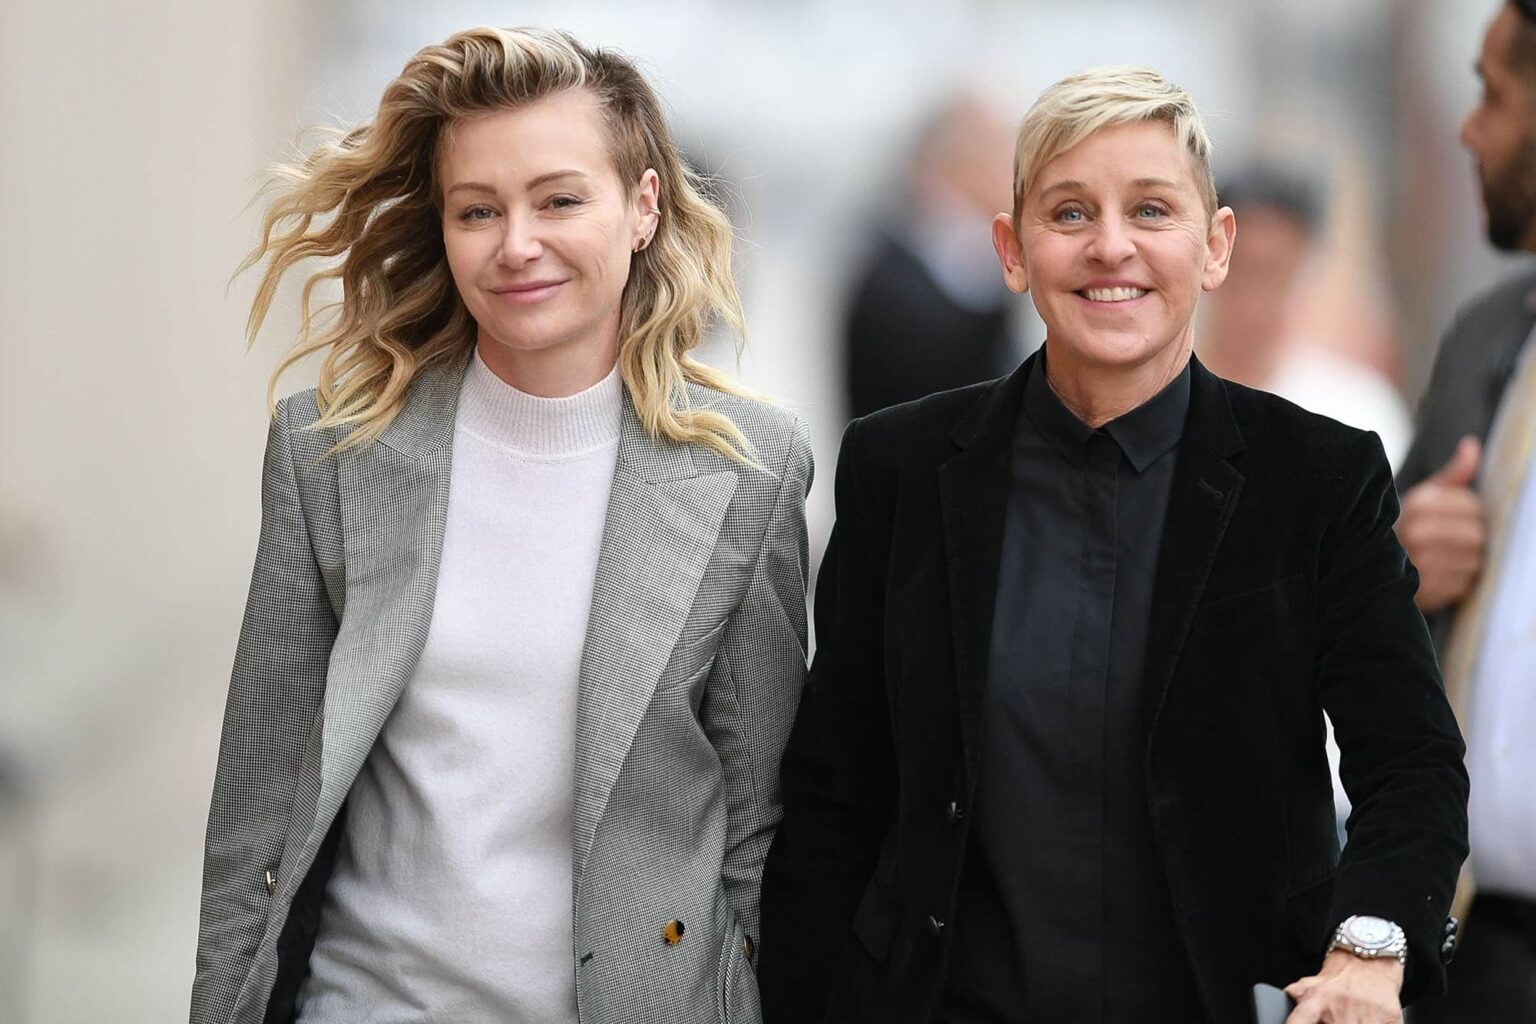 How much do you gush about your spouse? Probably not as much as Portia De Rossi gushes about her wife, Ellen DeGeneres. Read about their new interview!